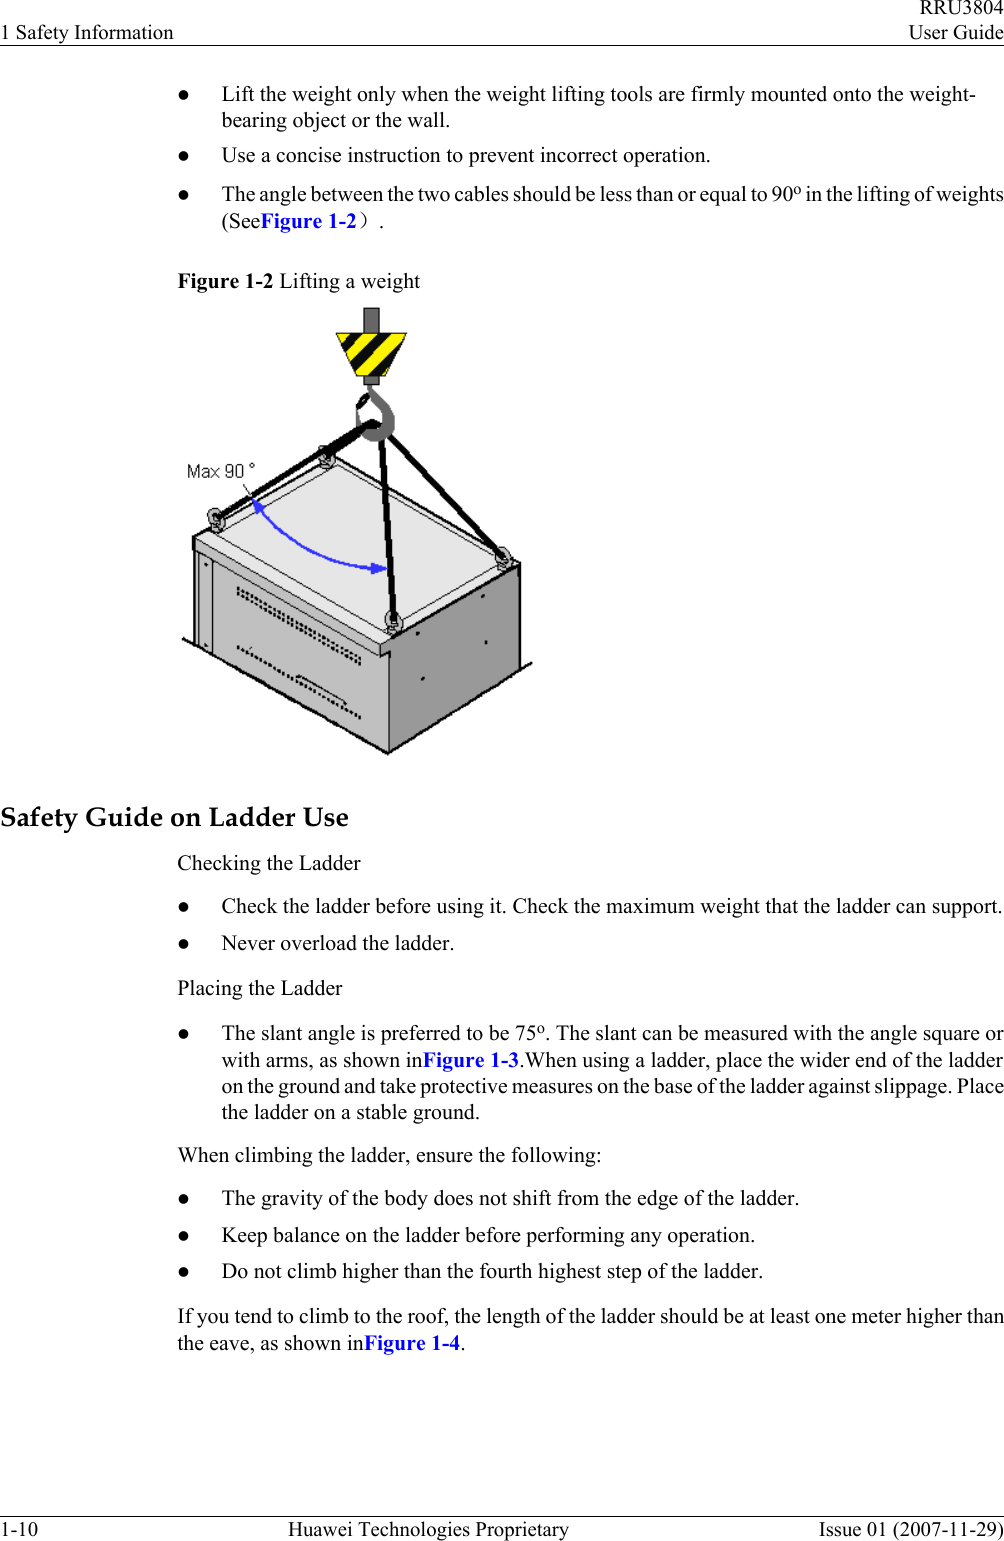 lLift the weight only when the weight lifting tools are firmly mounted onto the weight-bearing object or the wall.lUse a concise instruction to prevent incorrect operation.lThe angle between the two cables should be less than or equal to 90o in the lifting of weights(SeeFigure 1-2）.Figure 1-2 Lifting a weightSafety Guide on Ladder UseChecking the LadderlCheck the ladder before using it. Check the maximum weight that the ladder can support.lNever overload the ladder.Placing the LadderlThe slant angle is preferred to be 75o. The slant can be measured with the angle square orwith arms, as shown inFigure 1-3.When using a ladder, place the wider end of the ladderon the ground and take protective measures on the base of the ladder against slippage. Placethe ladder on a stable ground.When climbing the ladder, ensure the following:lThe gravity of the body does not shift from the edge of the ladder.lKeep balance on the ladder before performing any operation.lDo not climb higher than the fourth highest step of the ladder.If you tend to climb to the roof, the length of the ladder should be at least one meter higher thanthe eave, as shown inFigure 1-4.1 Safety InformationRRU3804User Guide1-10 Huawei Technologies Proprietary Issue 01 (2007-11-29)